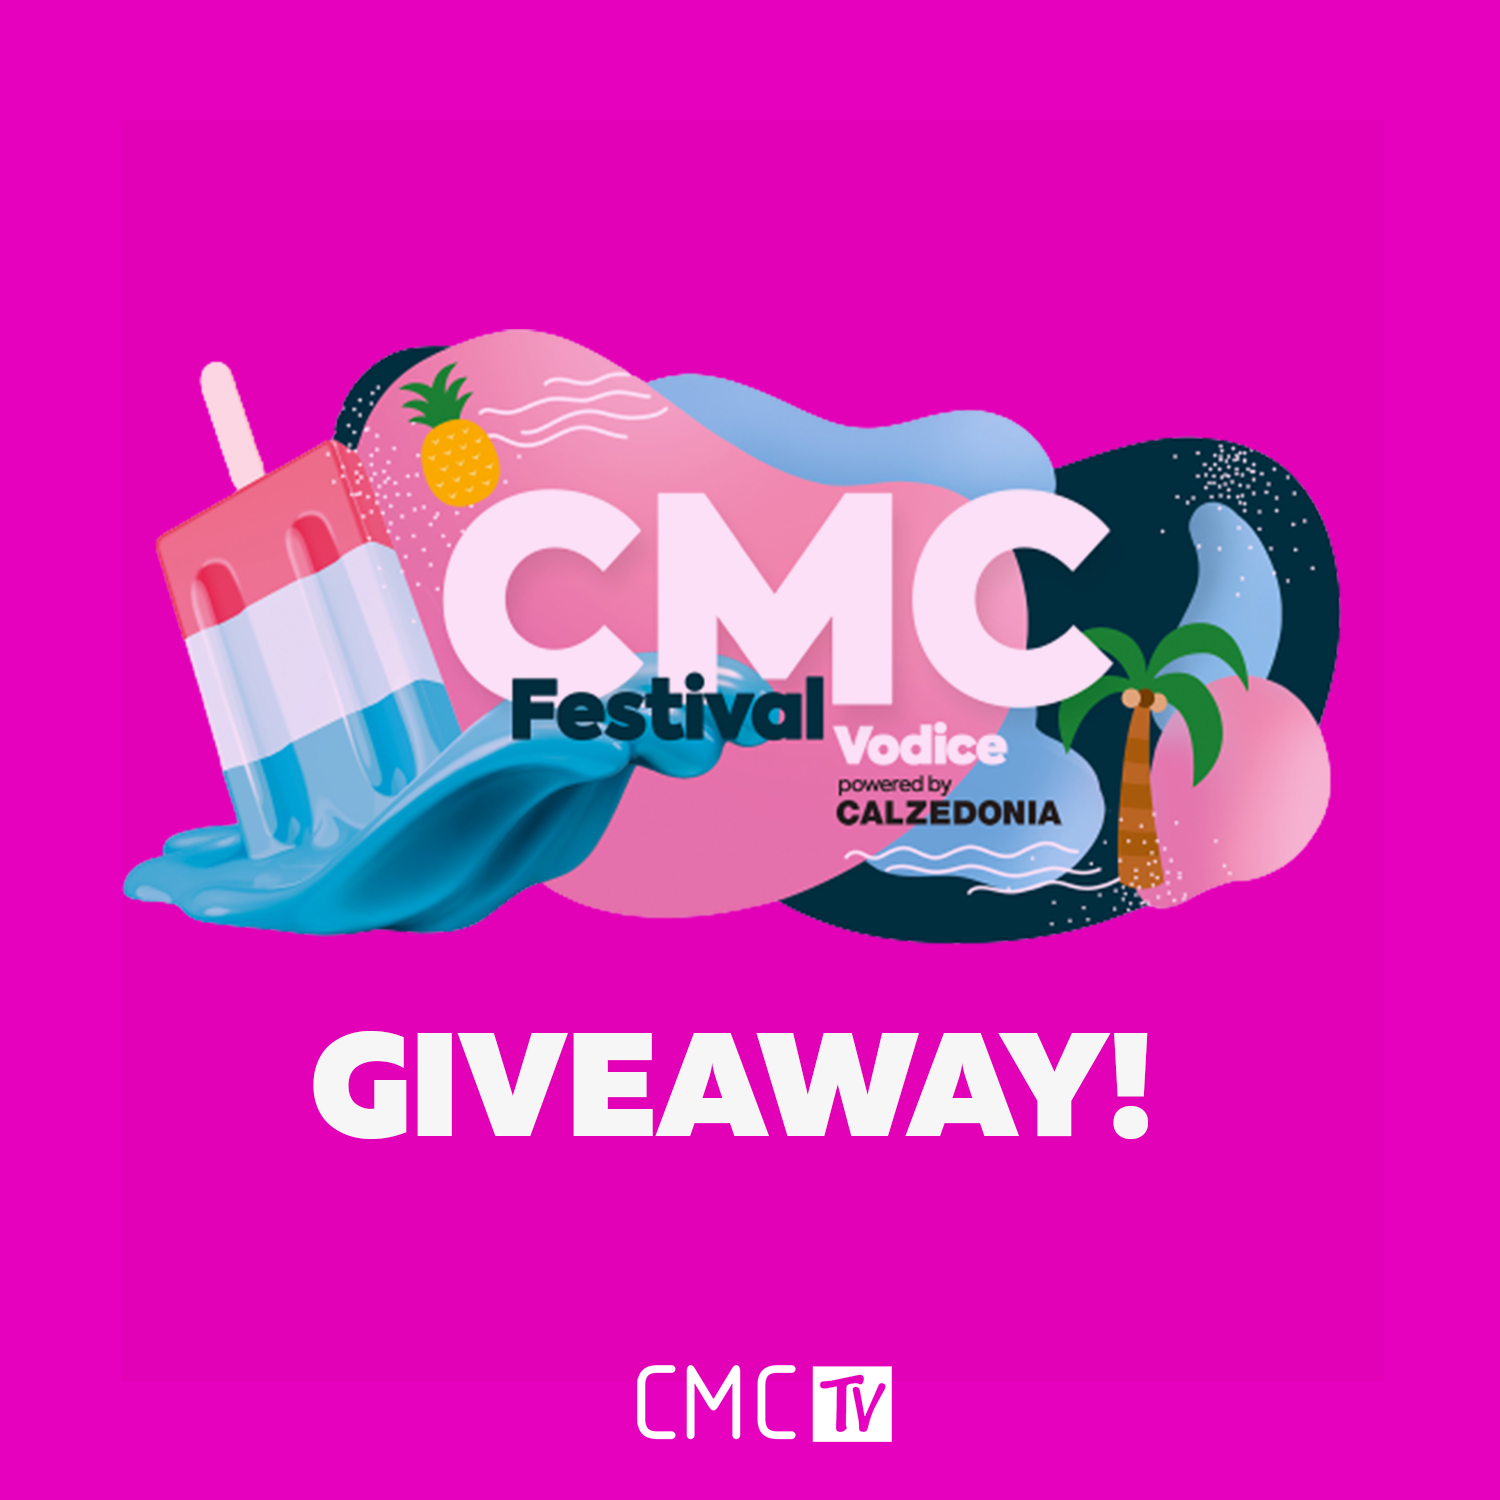 CMC GIVEAWAY!